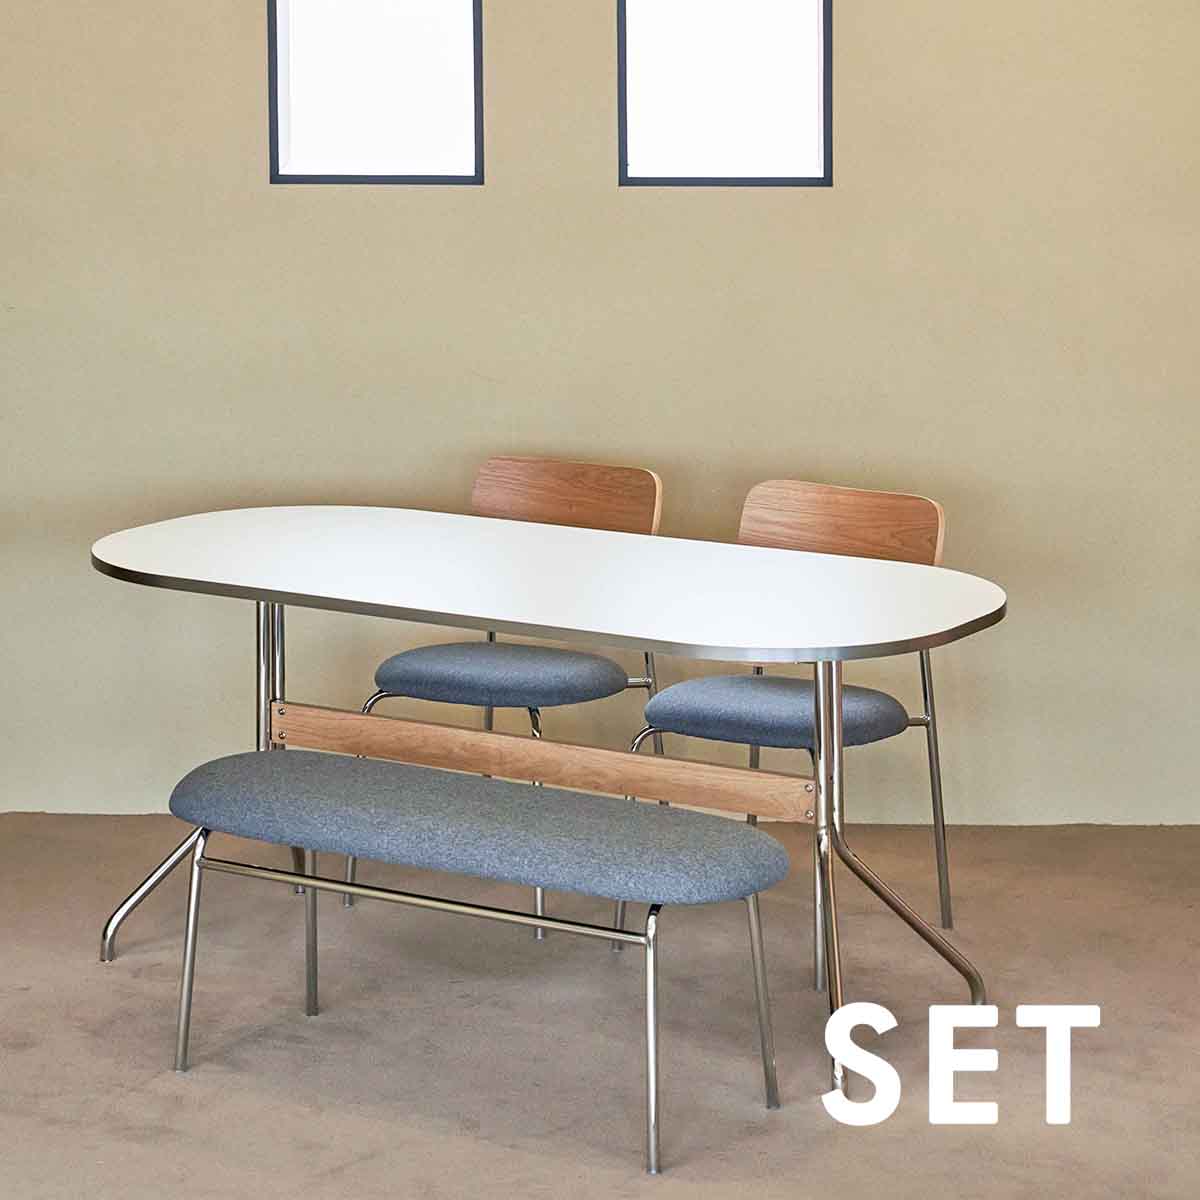 Delight Table 1700 + Bench / Chair SET